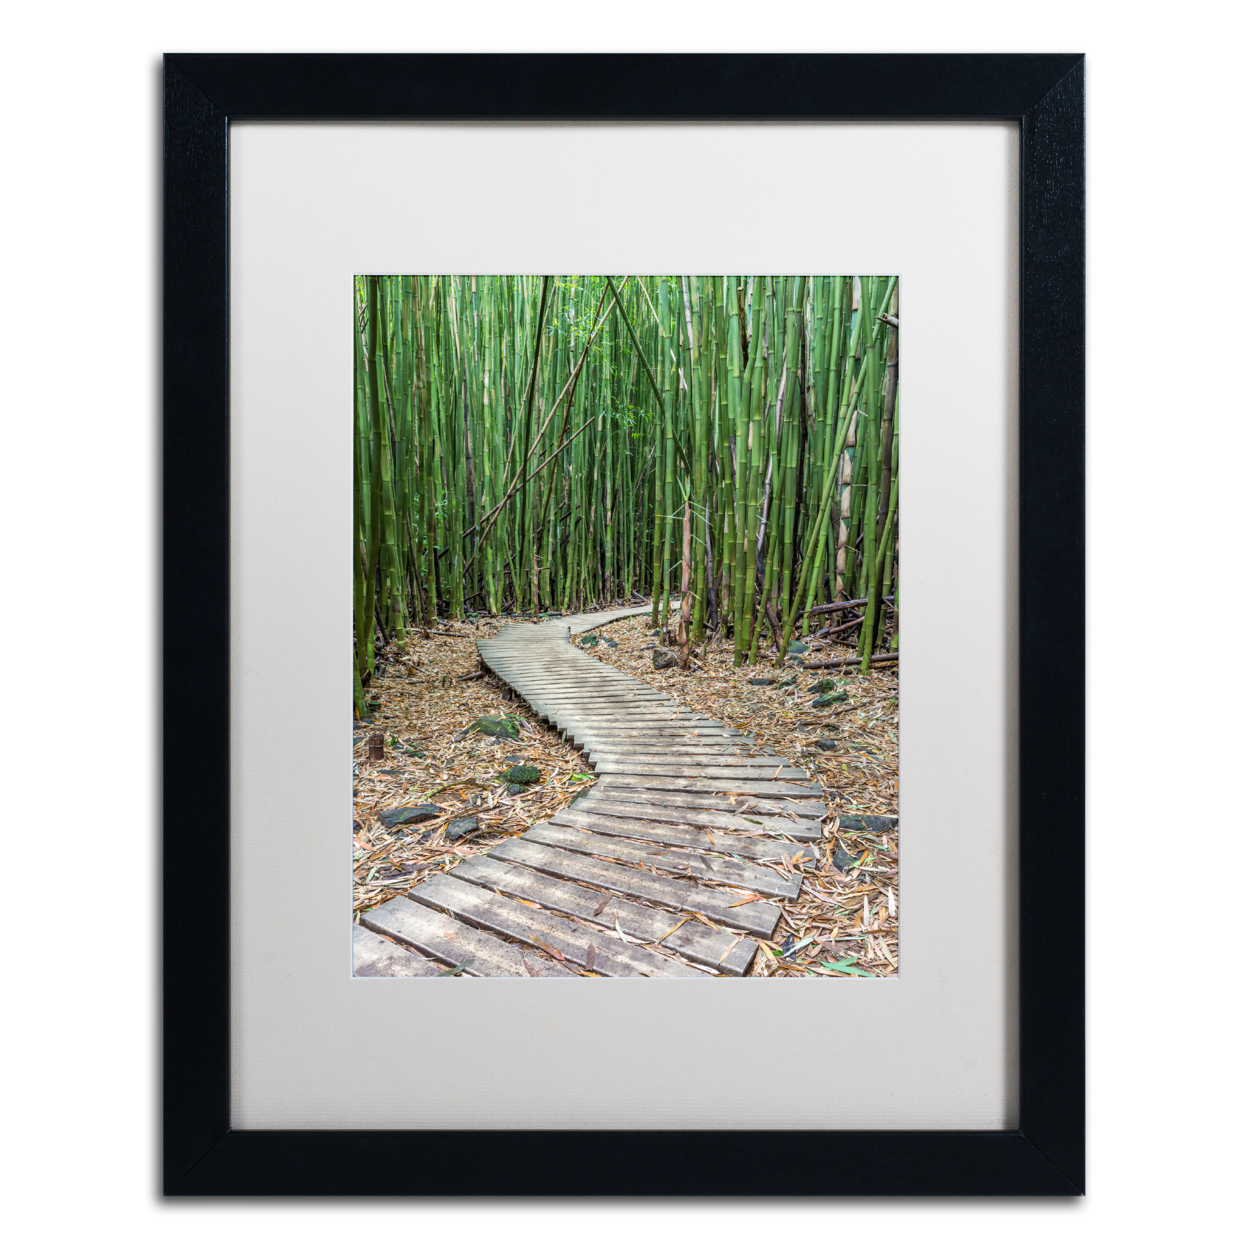 Pierre Leclerc 'Hiking Through The Bamboo Forest' Black Wooden Framed Art 18 X 22 Inches